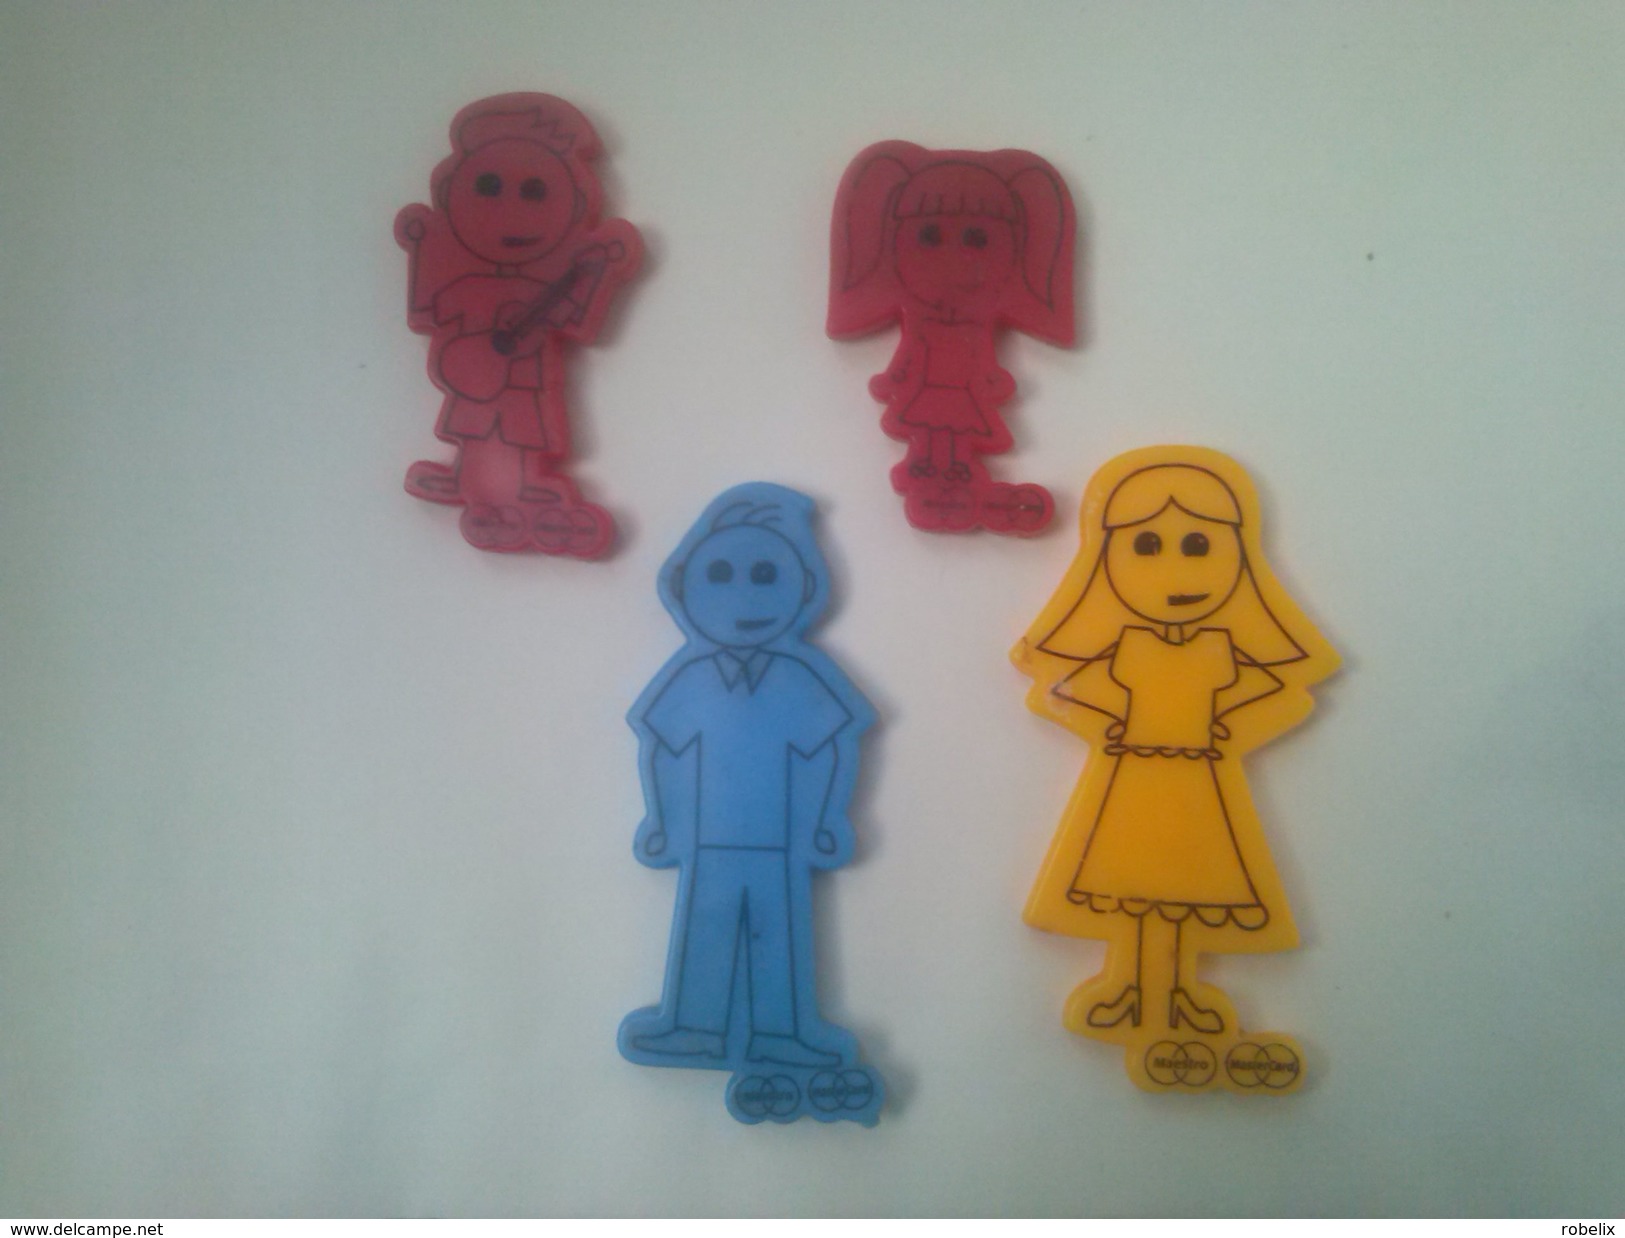 4 Magnets "Boys And Girls" (plastic-8 Cm)  30 Gr - Personnages